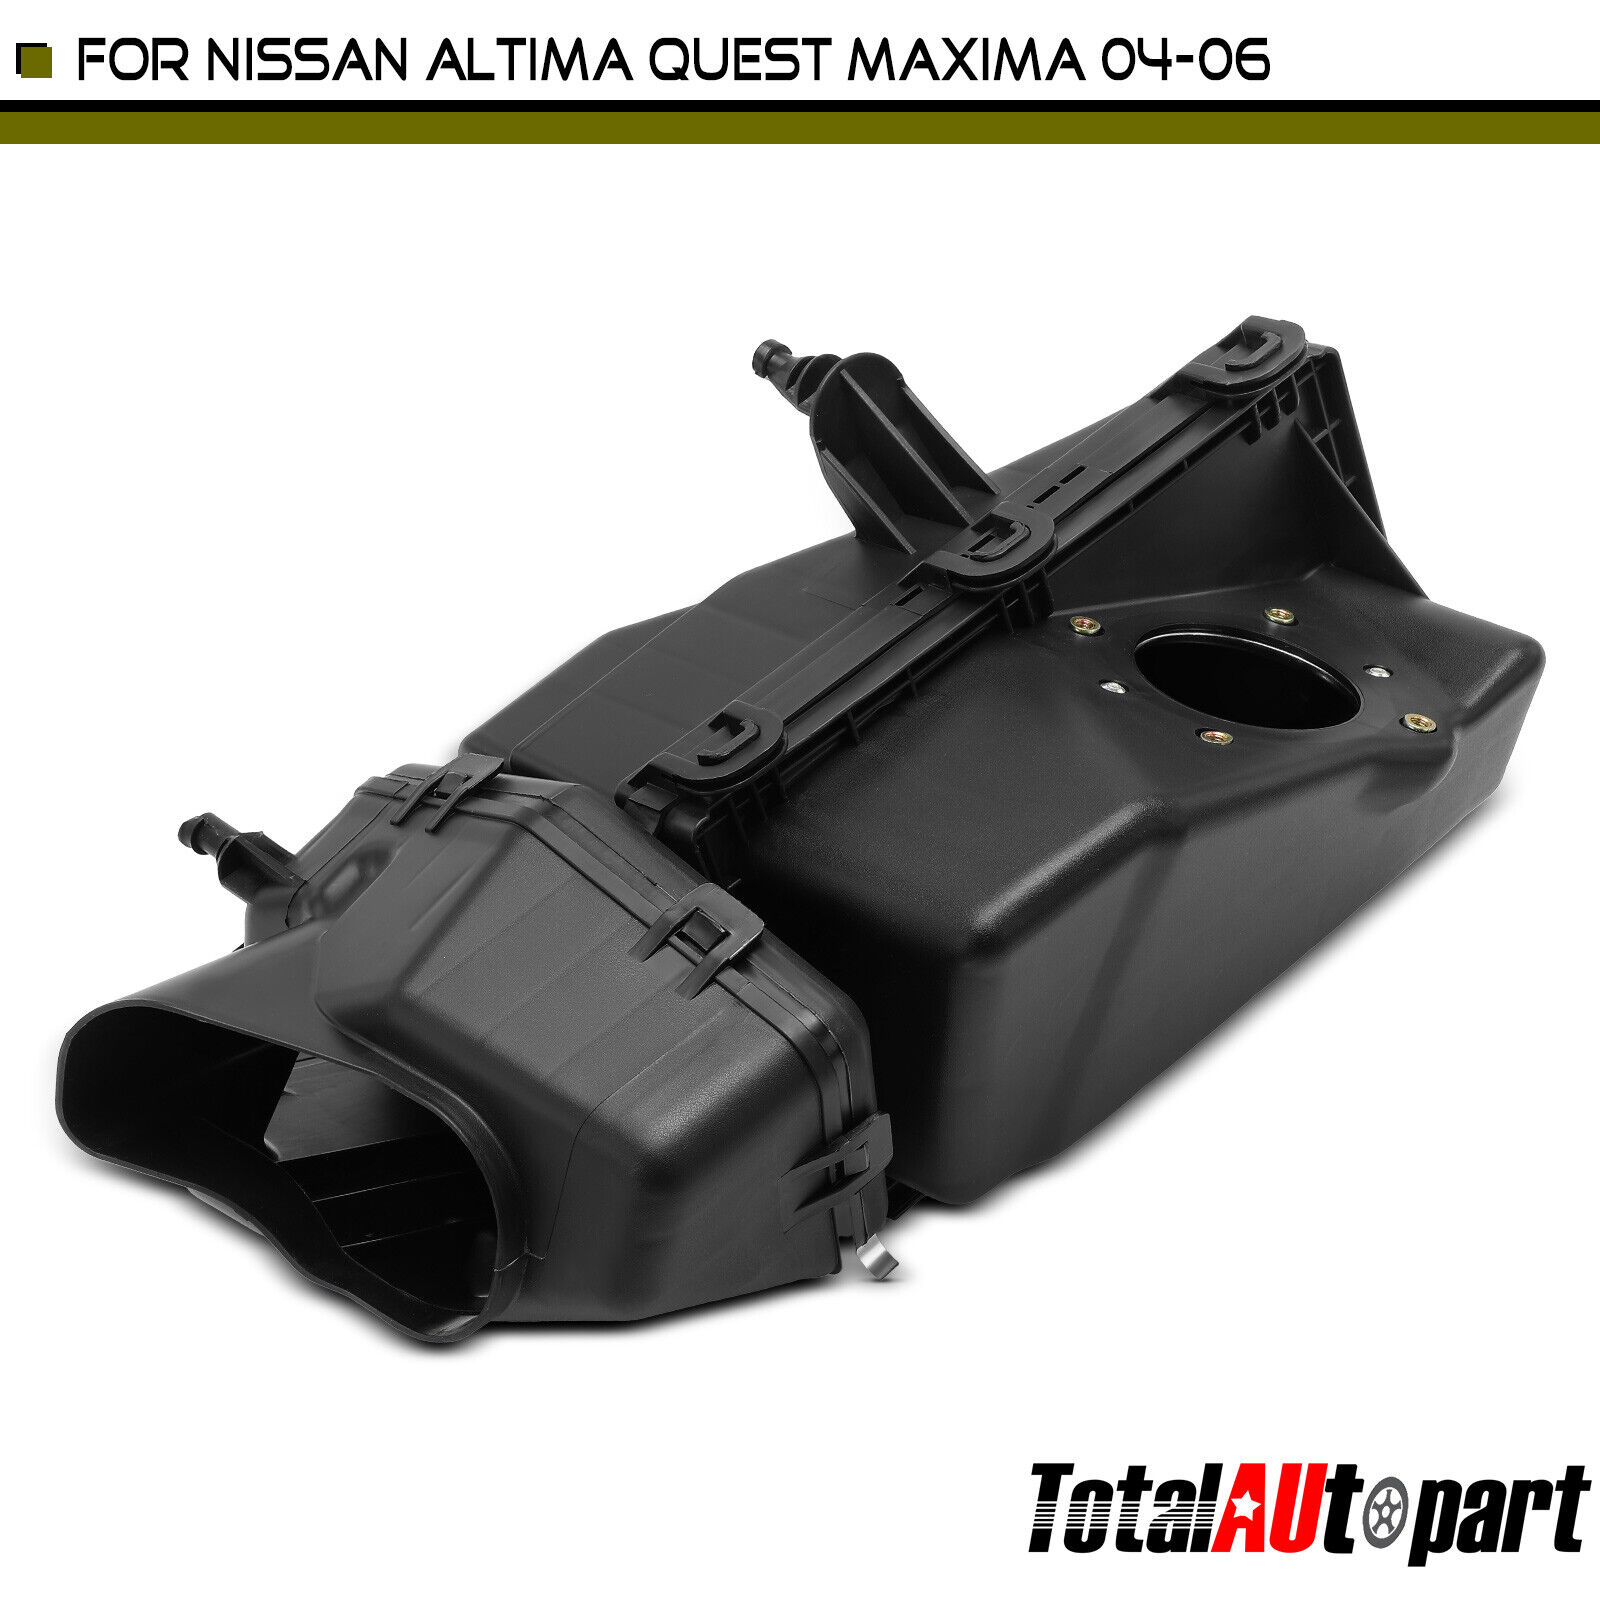 New Air Cleaner Intake Filter Box for Nissan Altima 2002-2006 Maxima 04-06 Quest